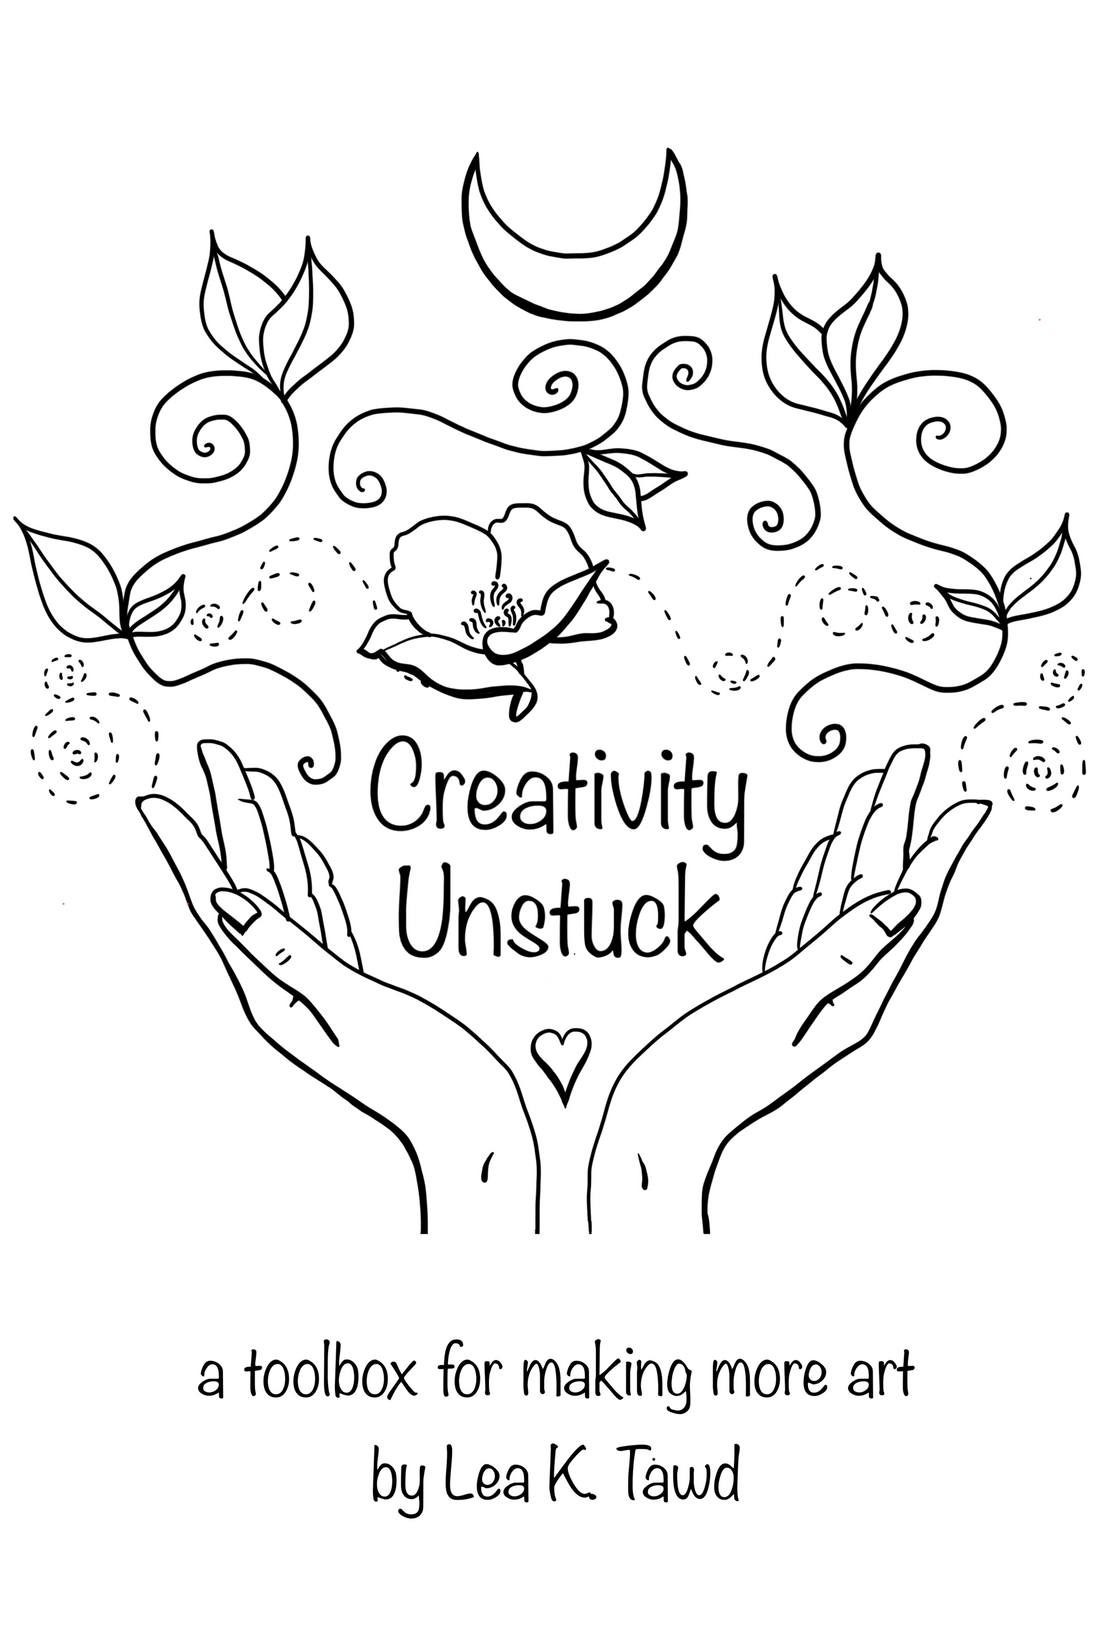 Creativity Unstuck: a toolbox for making more art